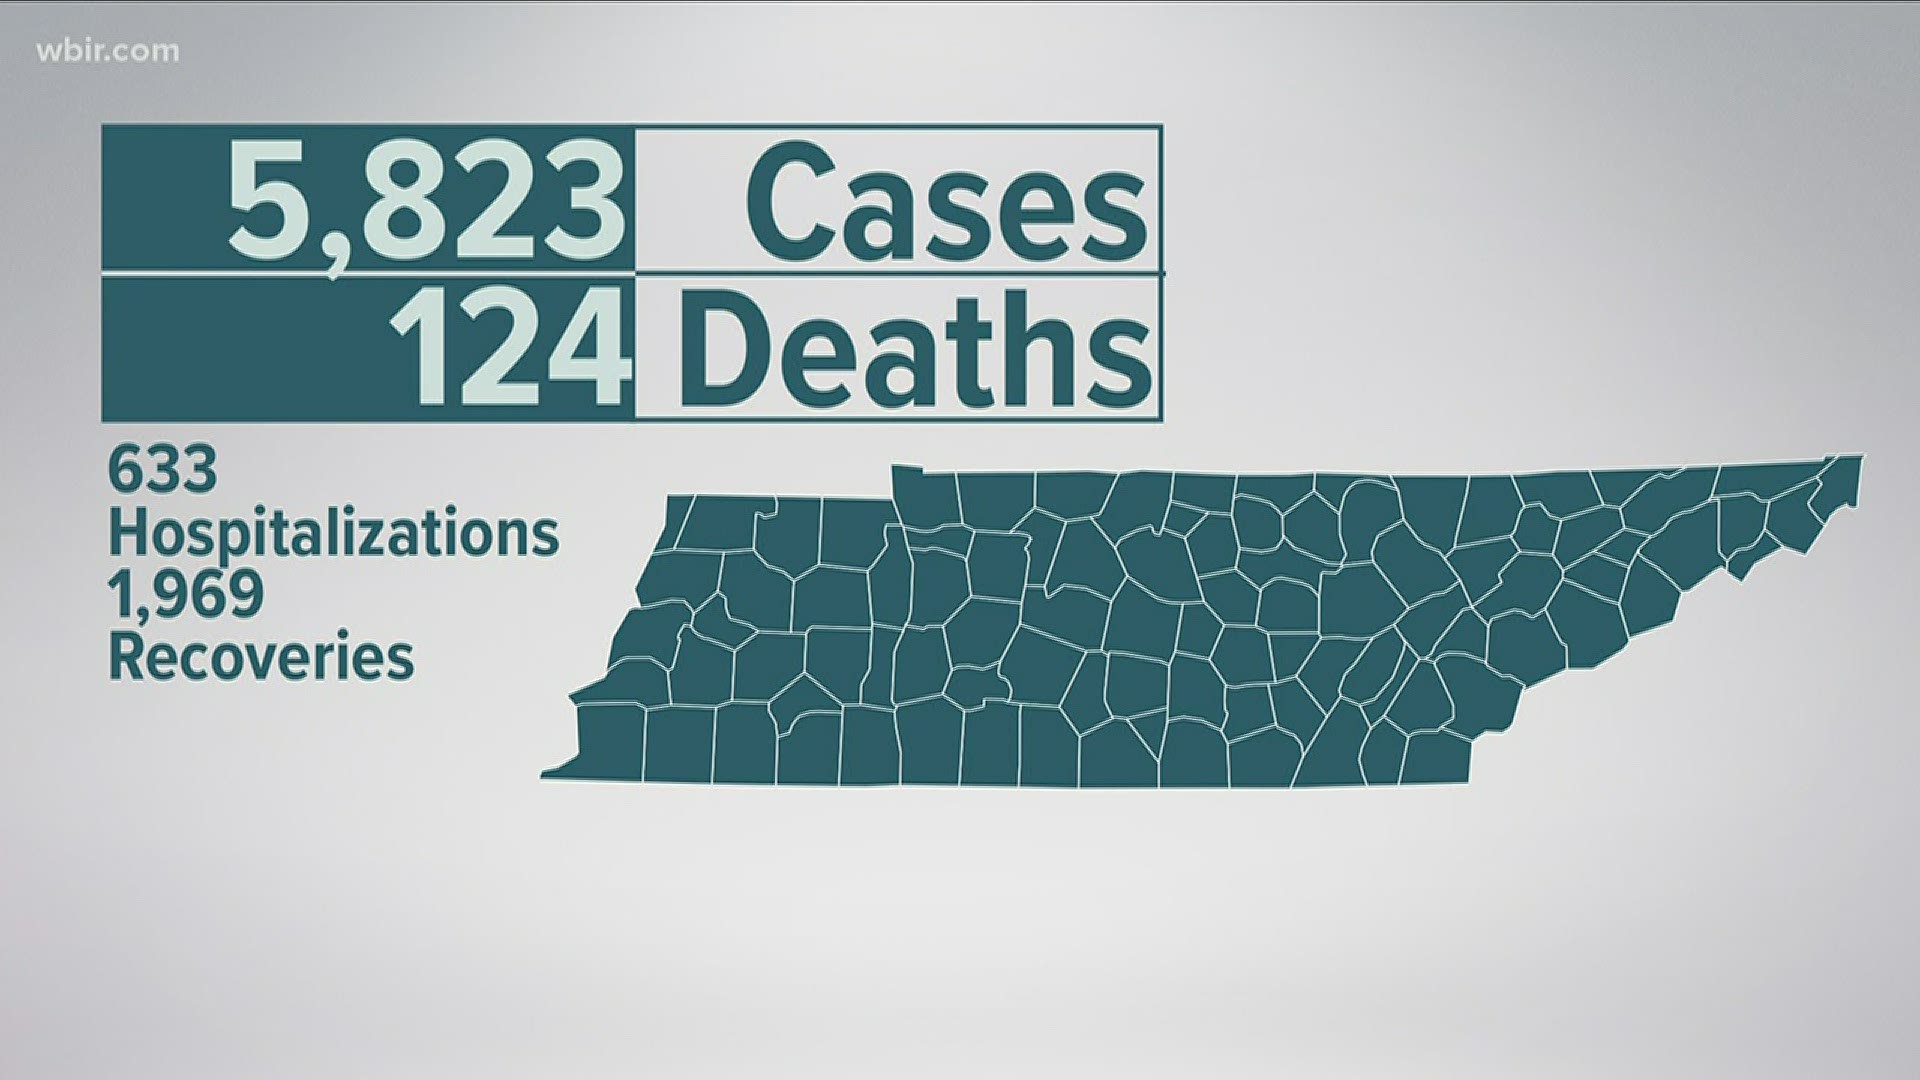 There are now 5,823 cases of COVID-19 in Tennessee.